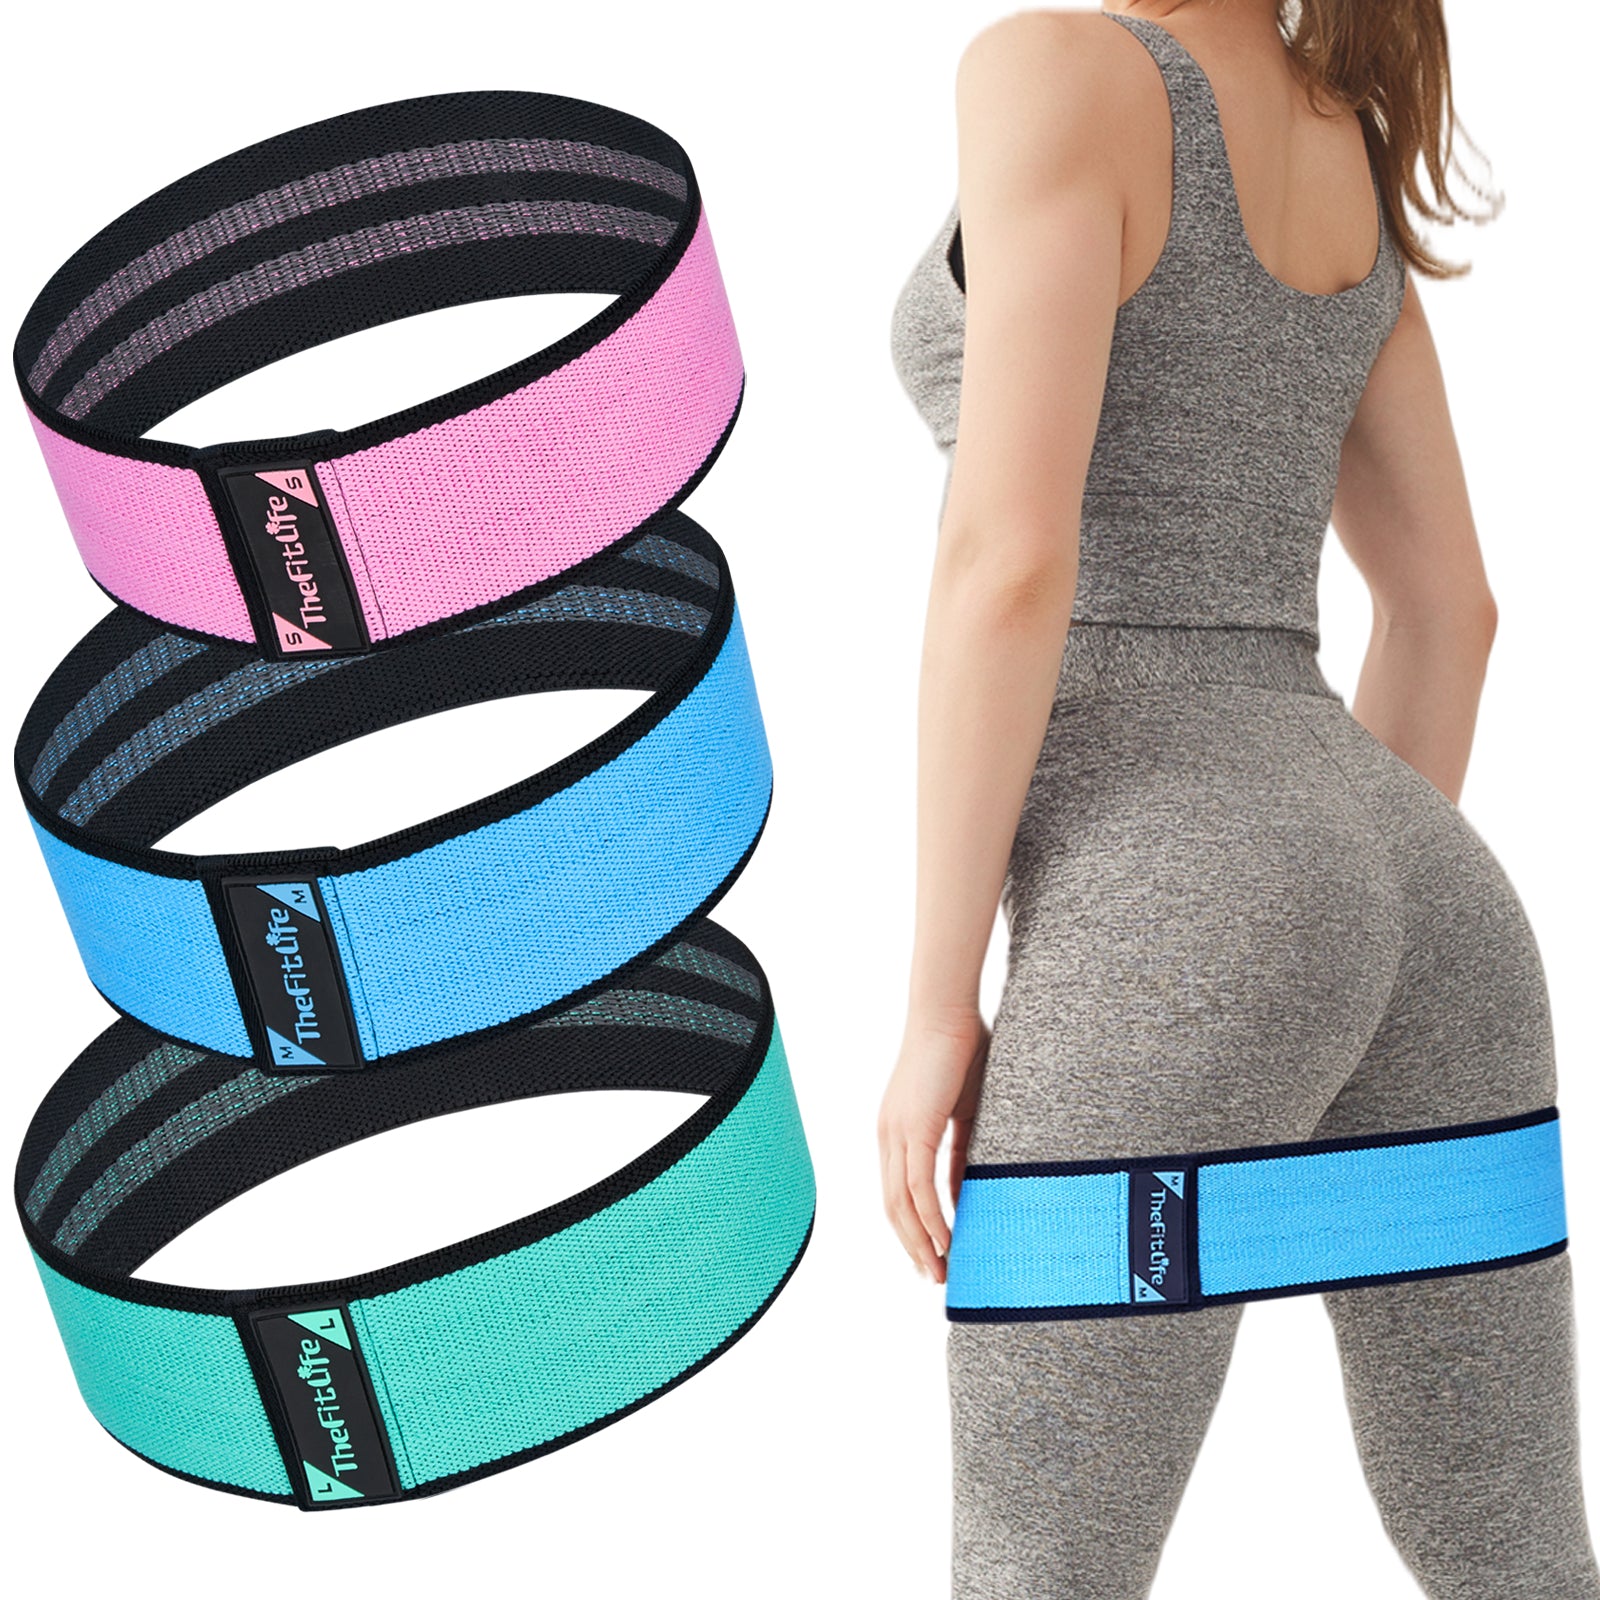 Buy Boldfit Fabric Resistance Band - Loop Hip Band for Women & Men for Hip,  Legs, Stretching, Toning Workout. Mini Loop Booty Bands for Glutes, Squats  Exercise Usable in-Home & Gym. (Set